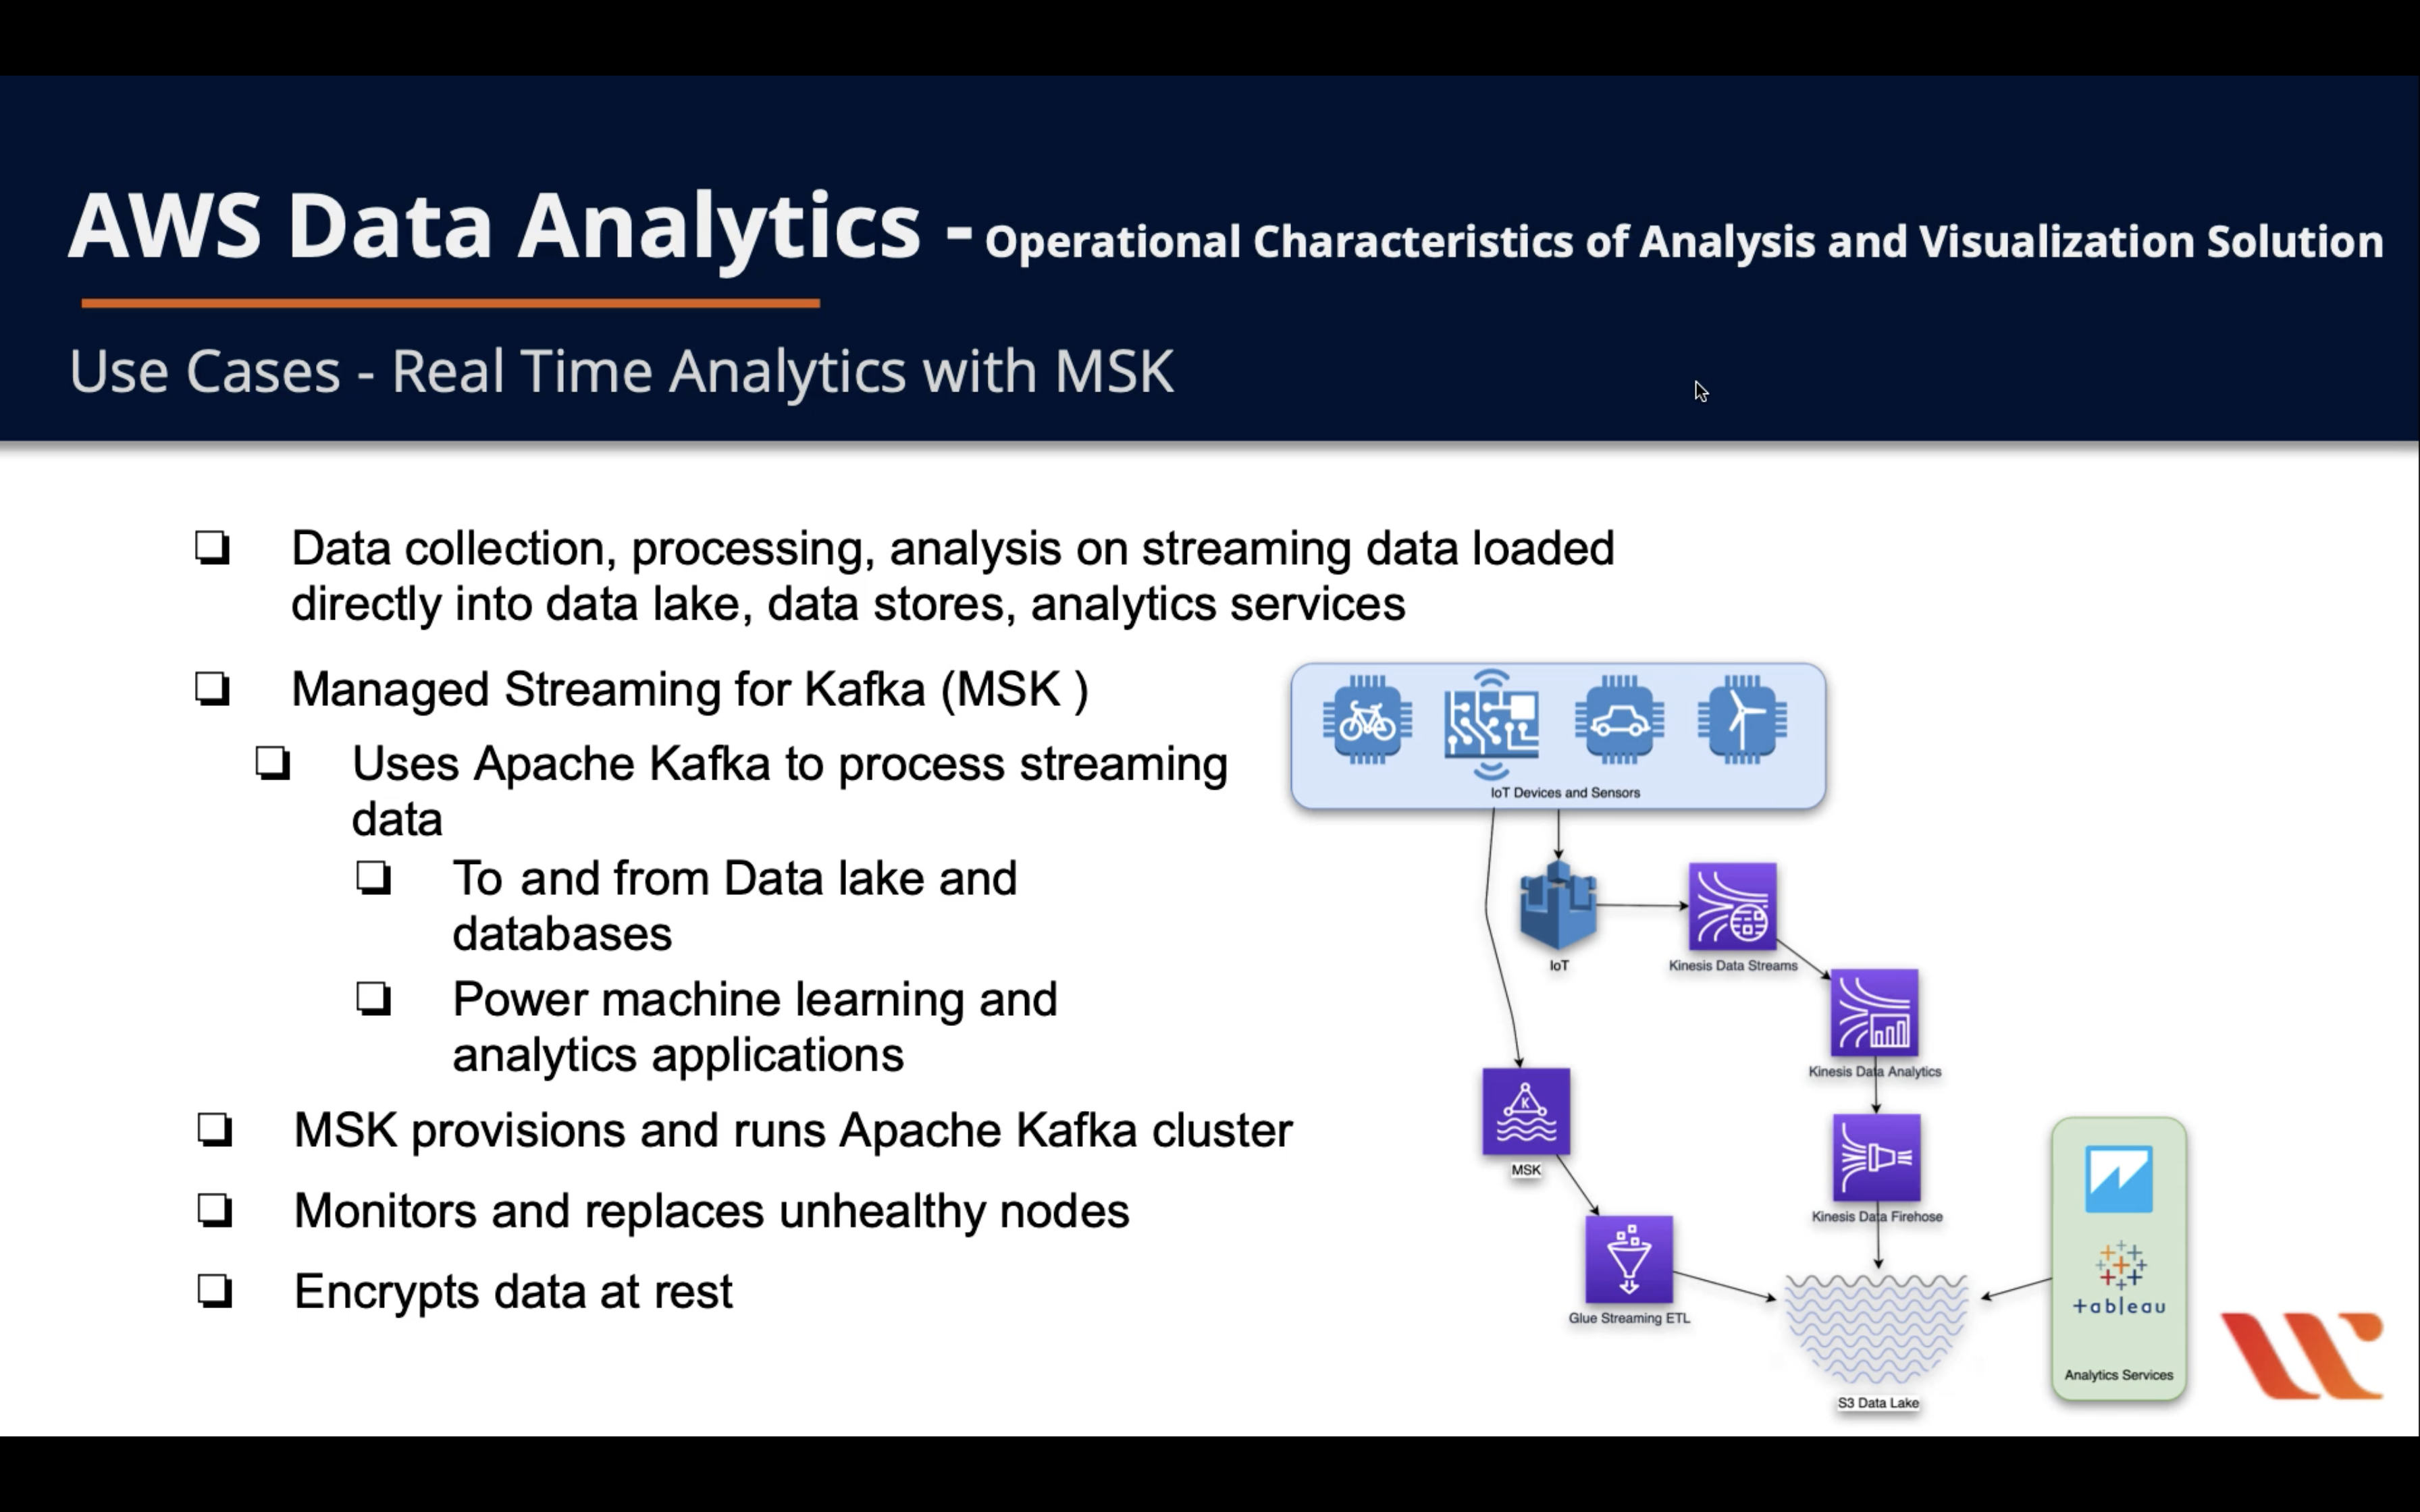 Streaming Data Solution for  Kinesis, AWS Solutions